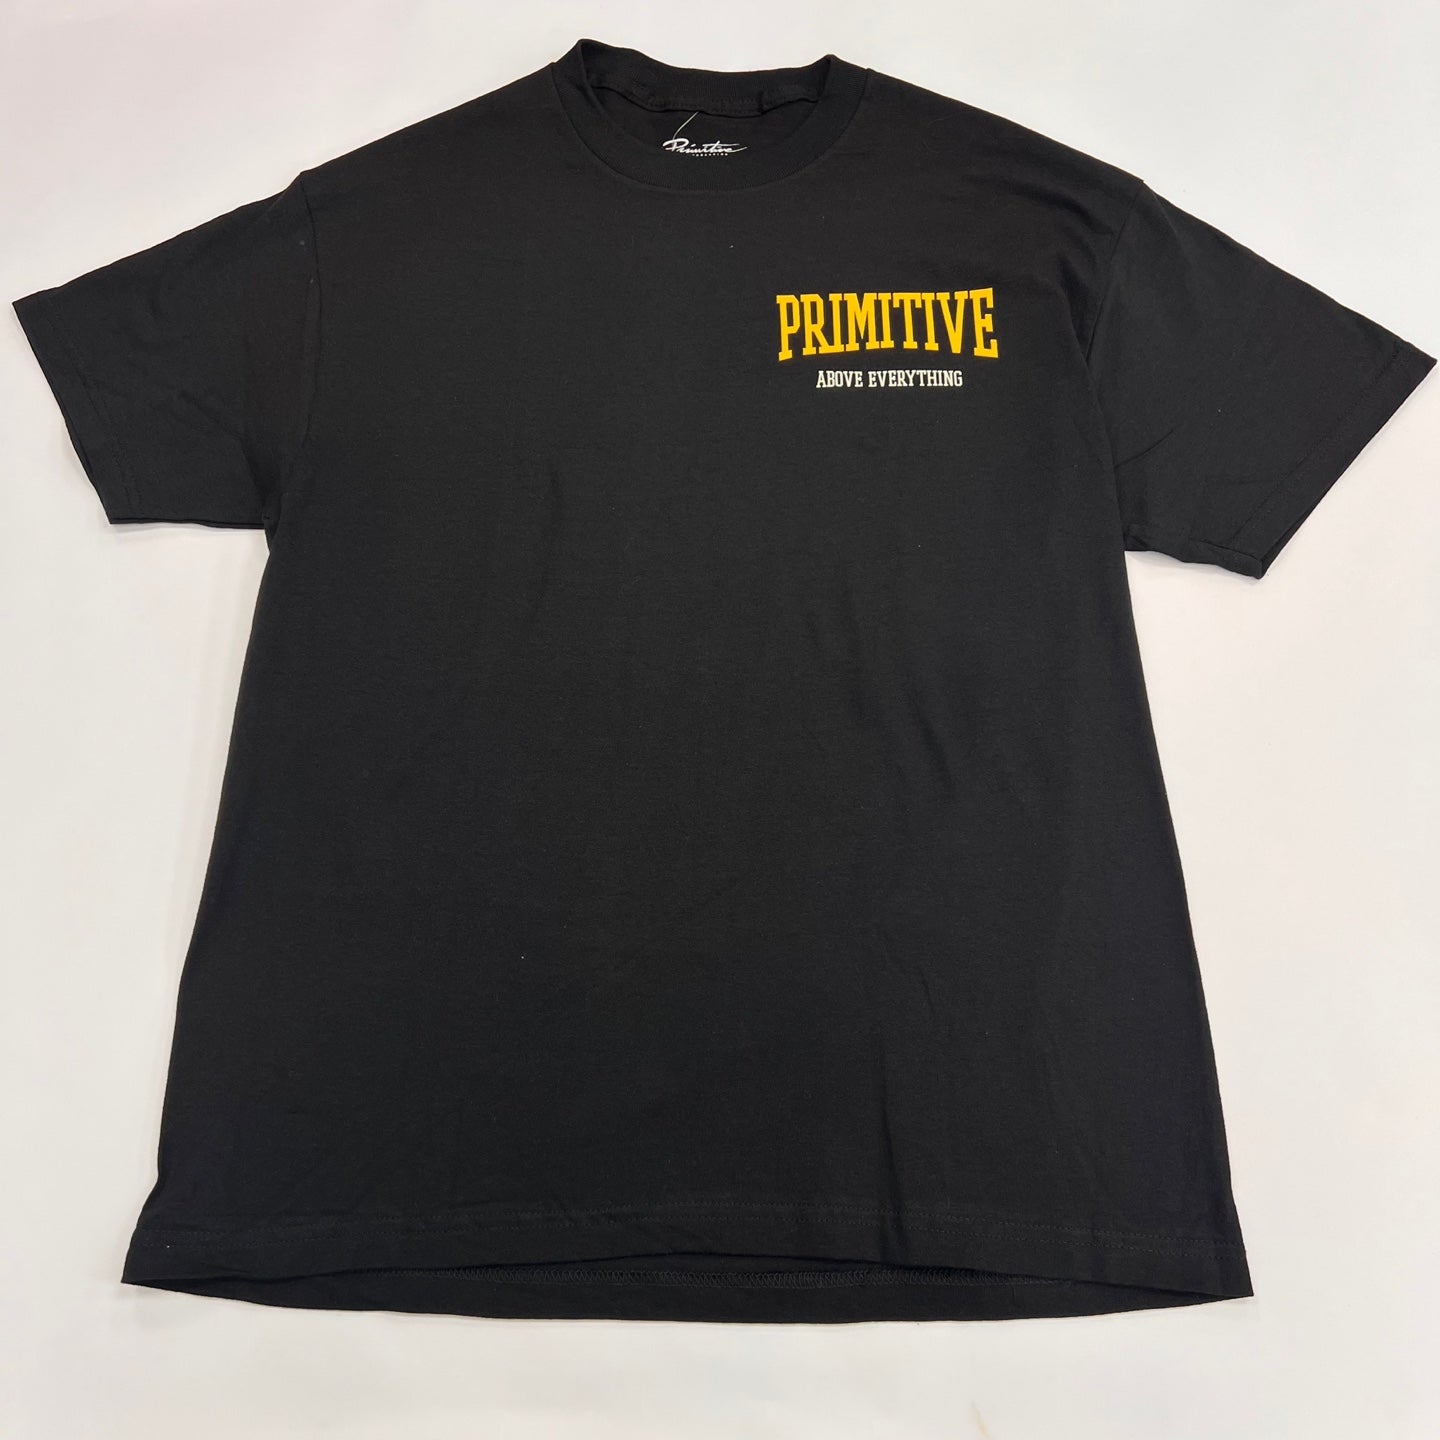 PRIMITIVE Above Everything Graphic T-Shirt